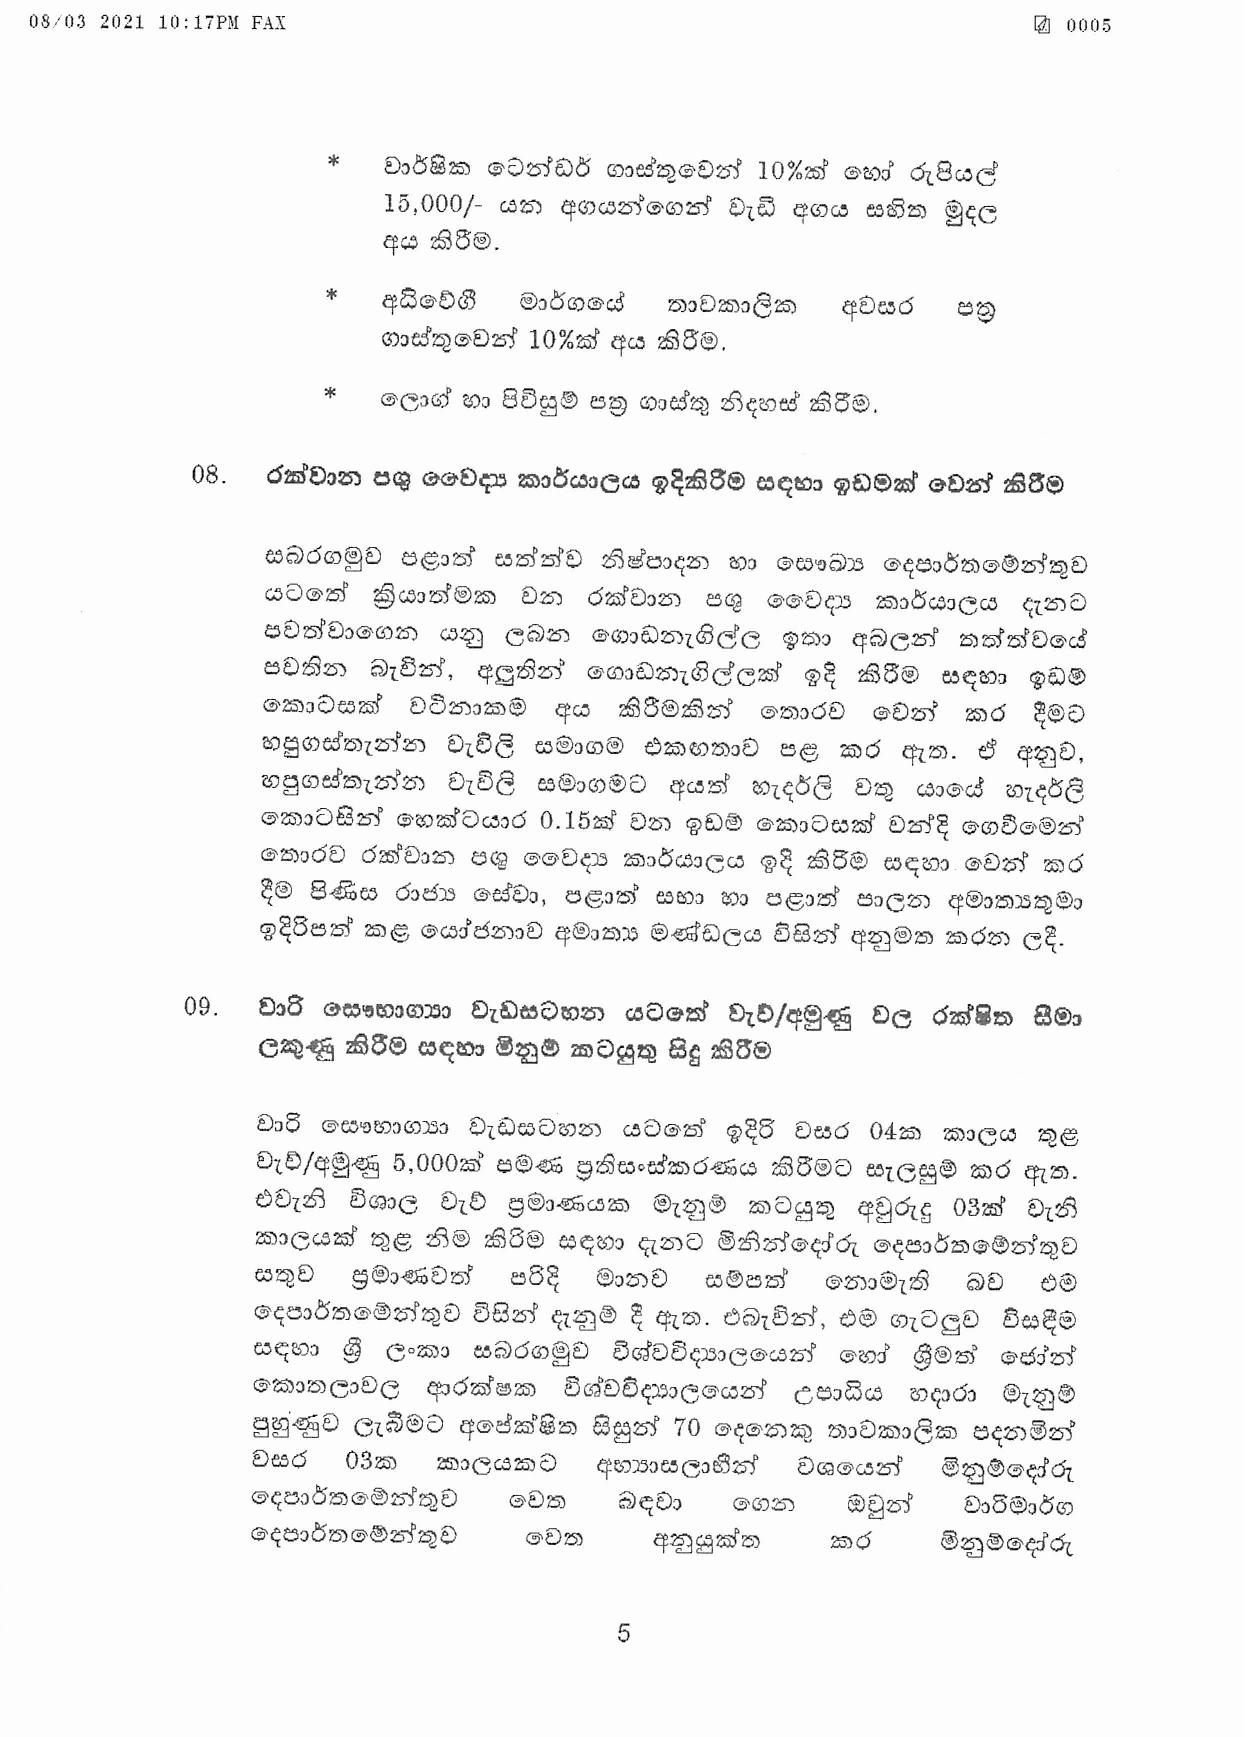 Cabinet Decision on 08.03.2021 page 005